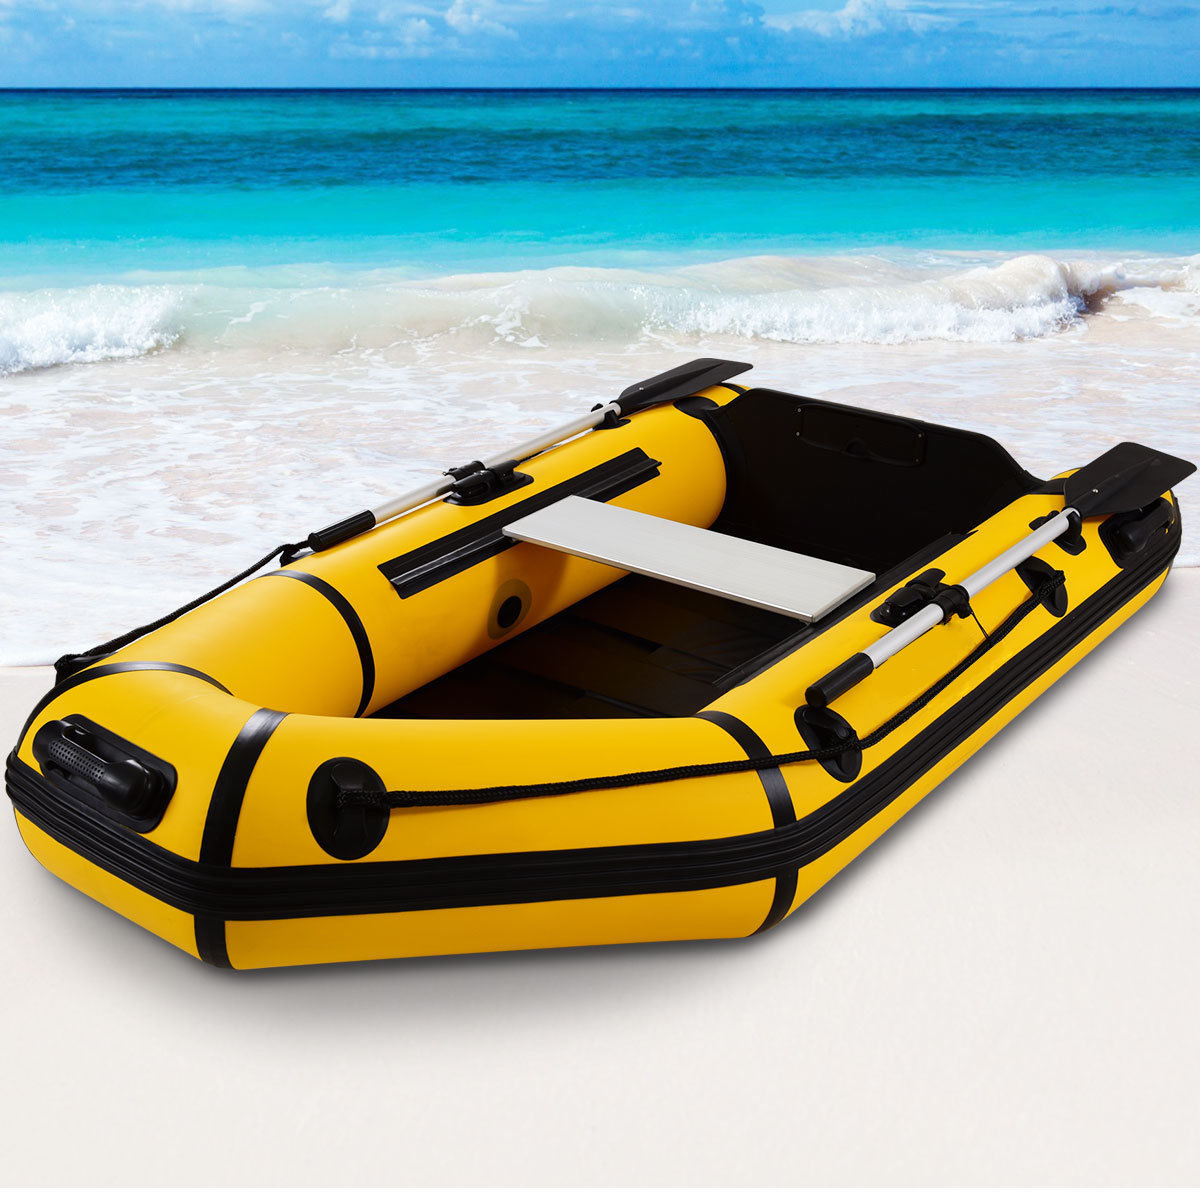 DeporteStar 2019 HZX-HY 360 Inflatable Boat 